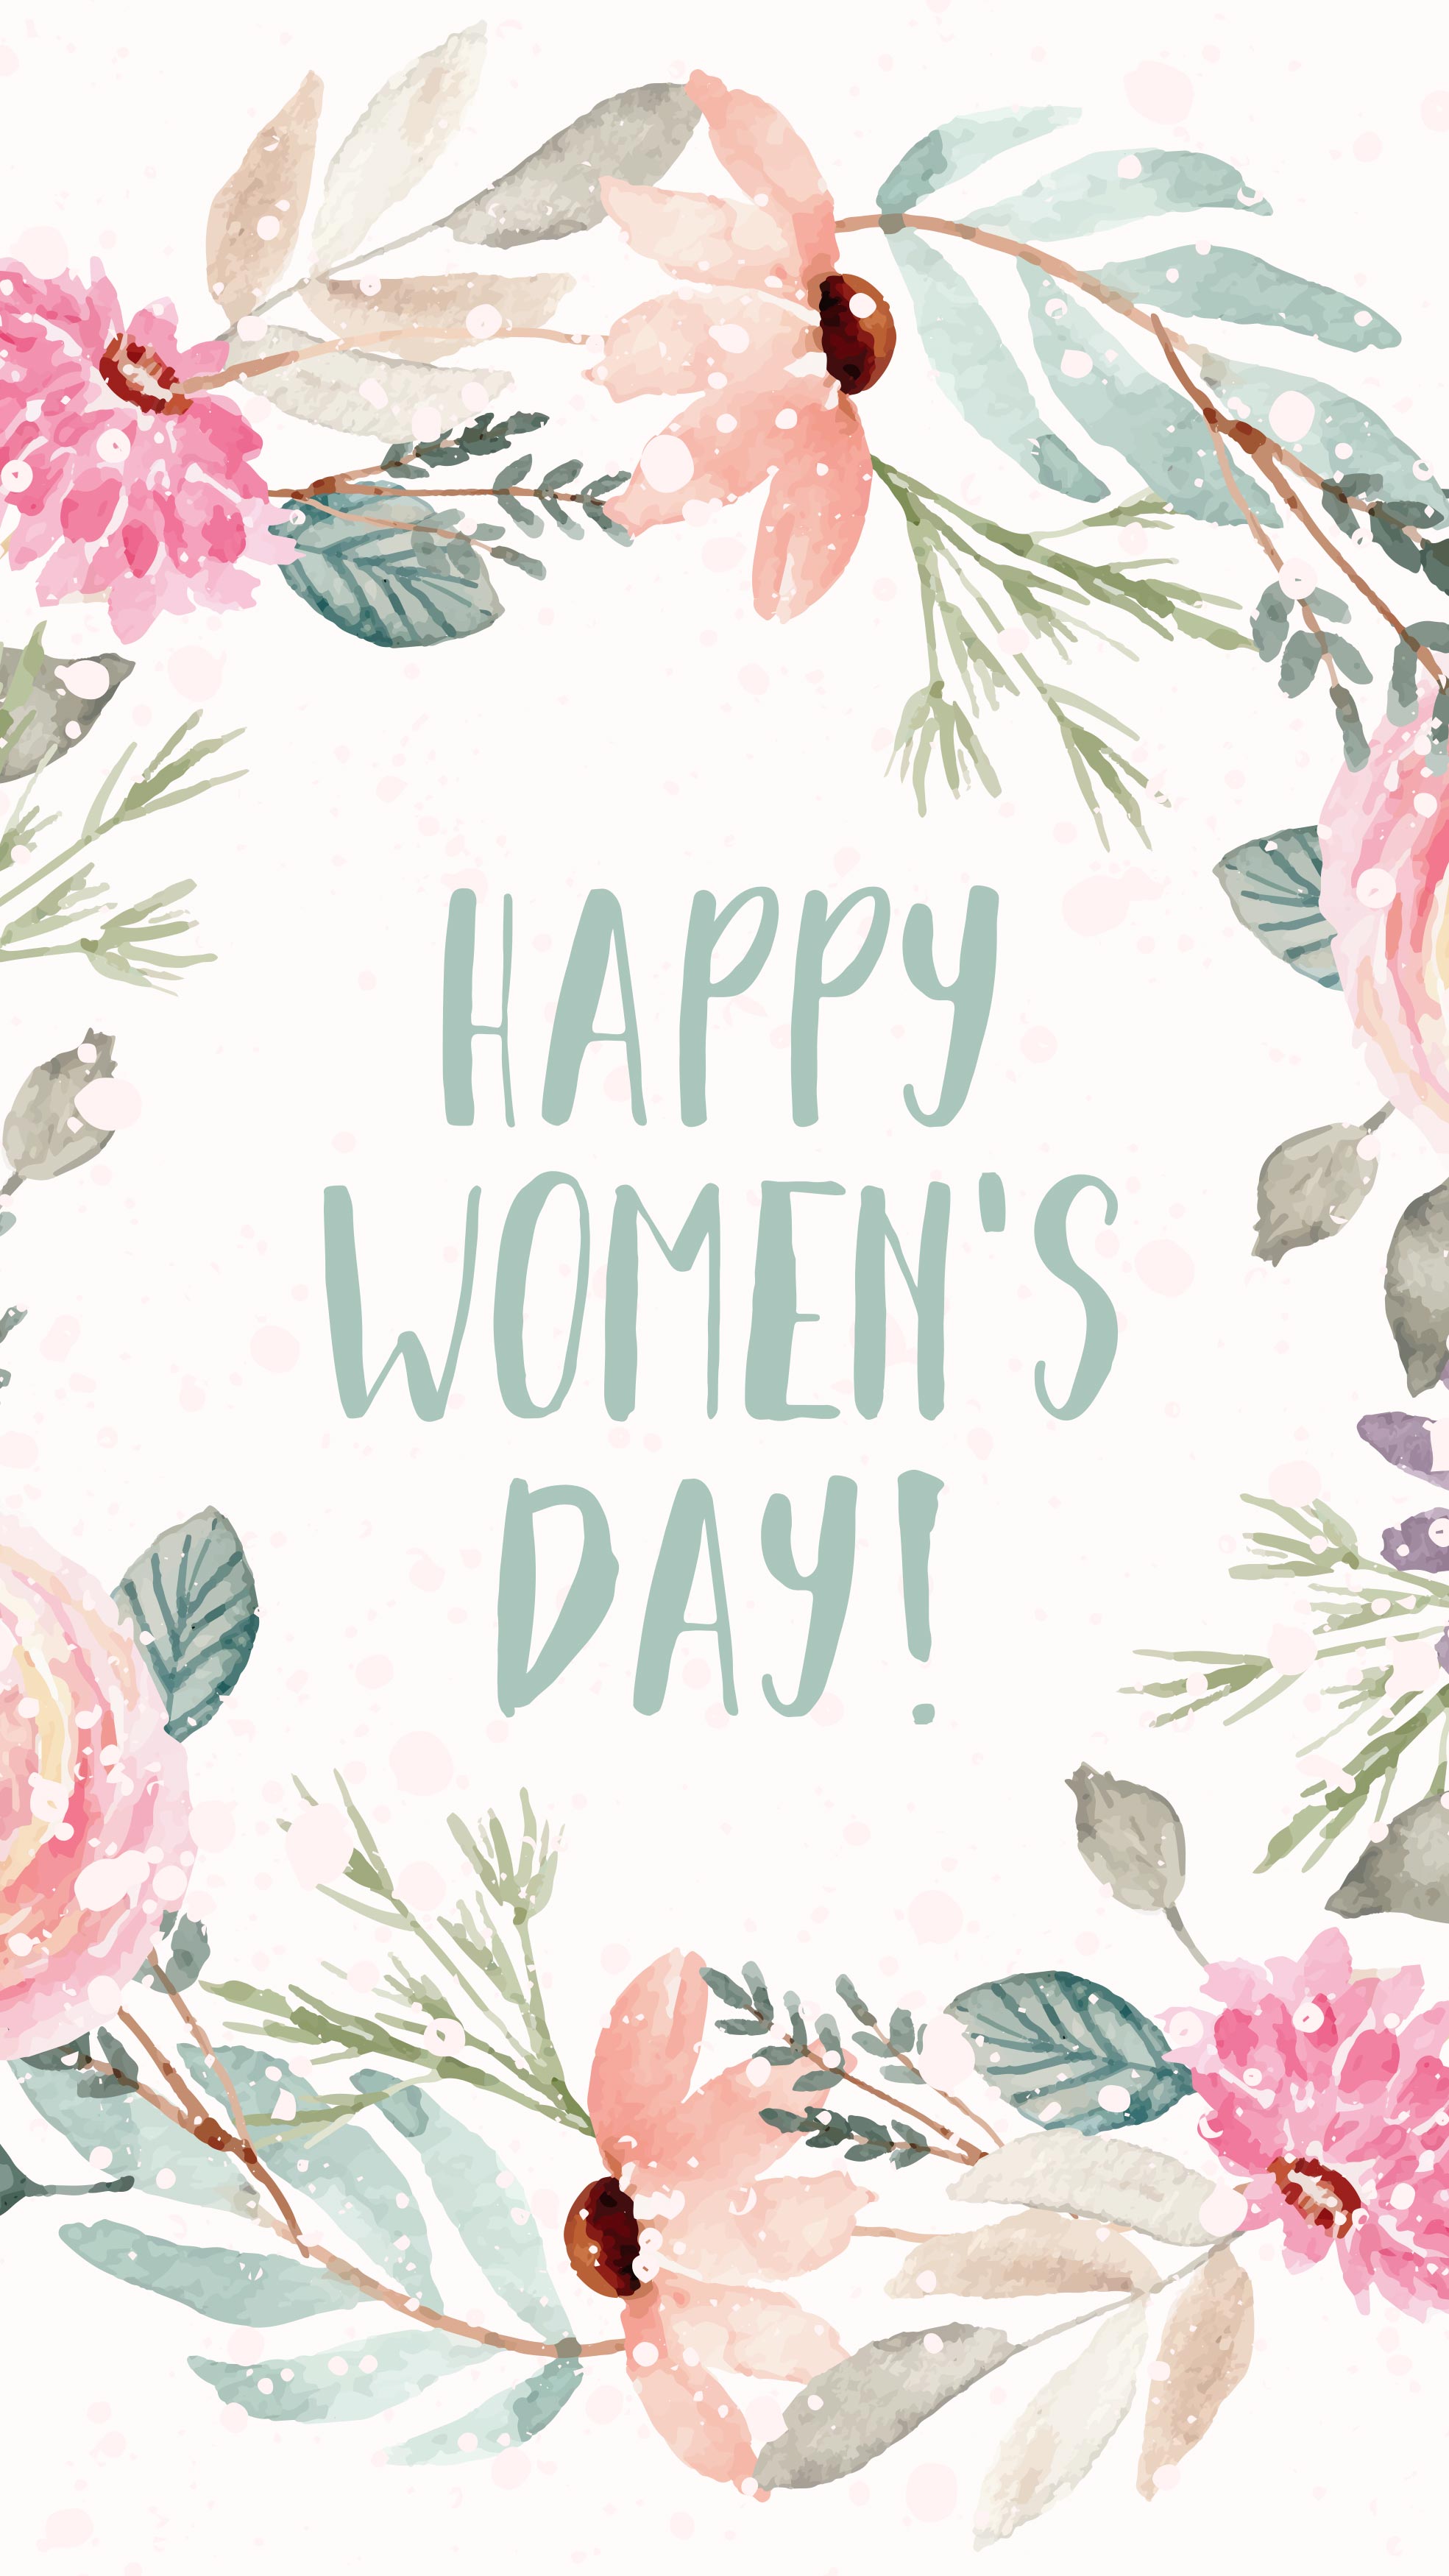 International Women's Day e-Cards for Free